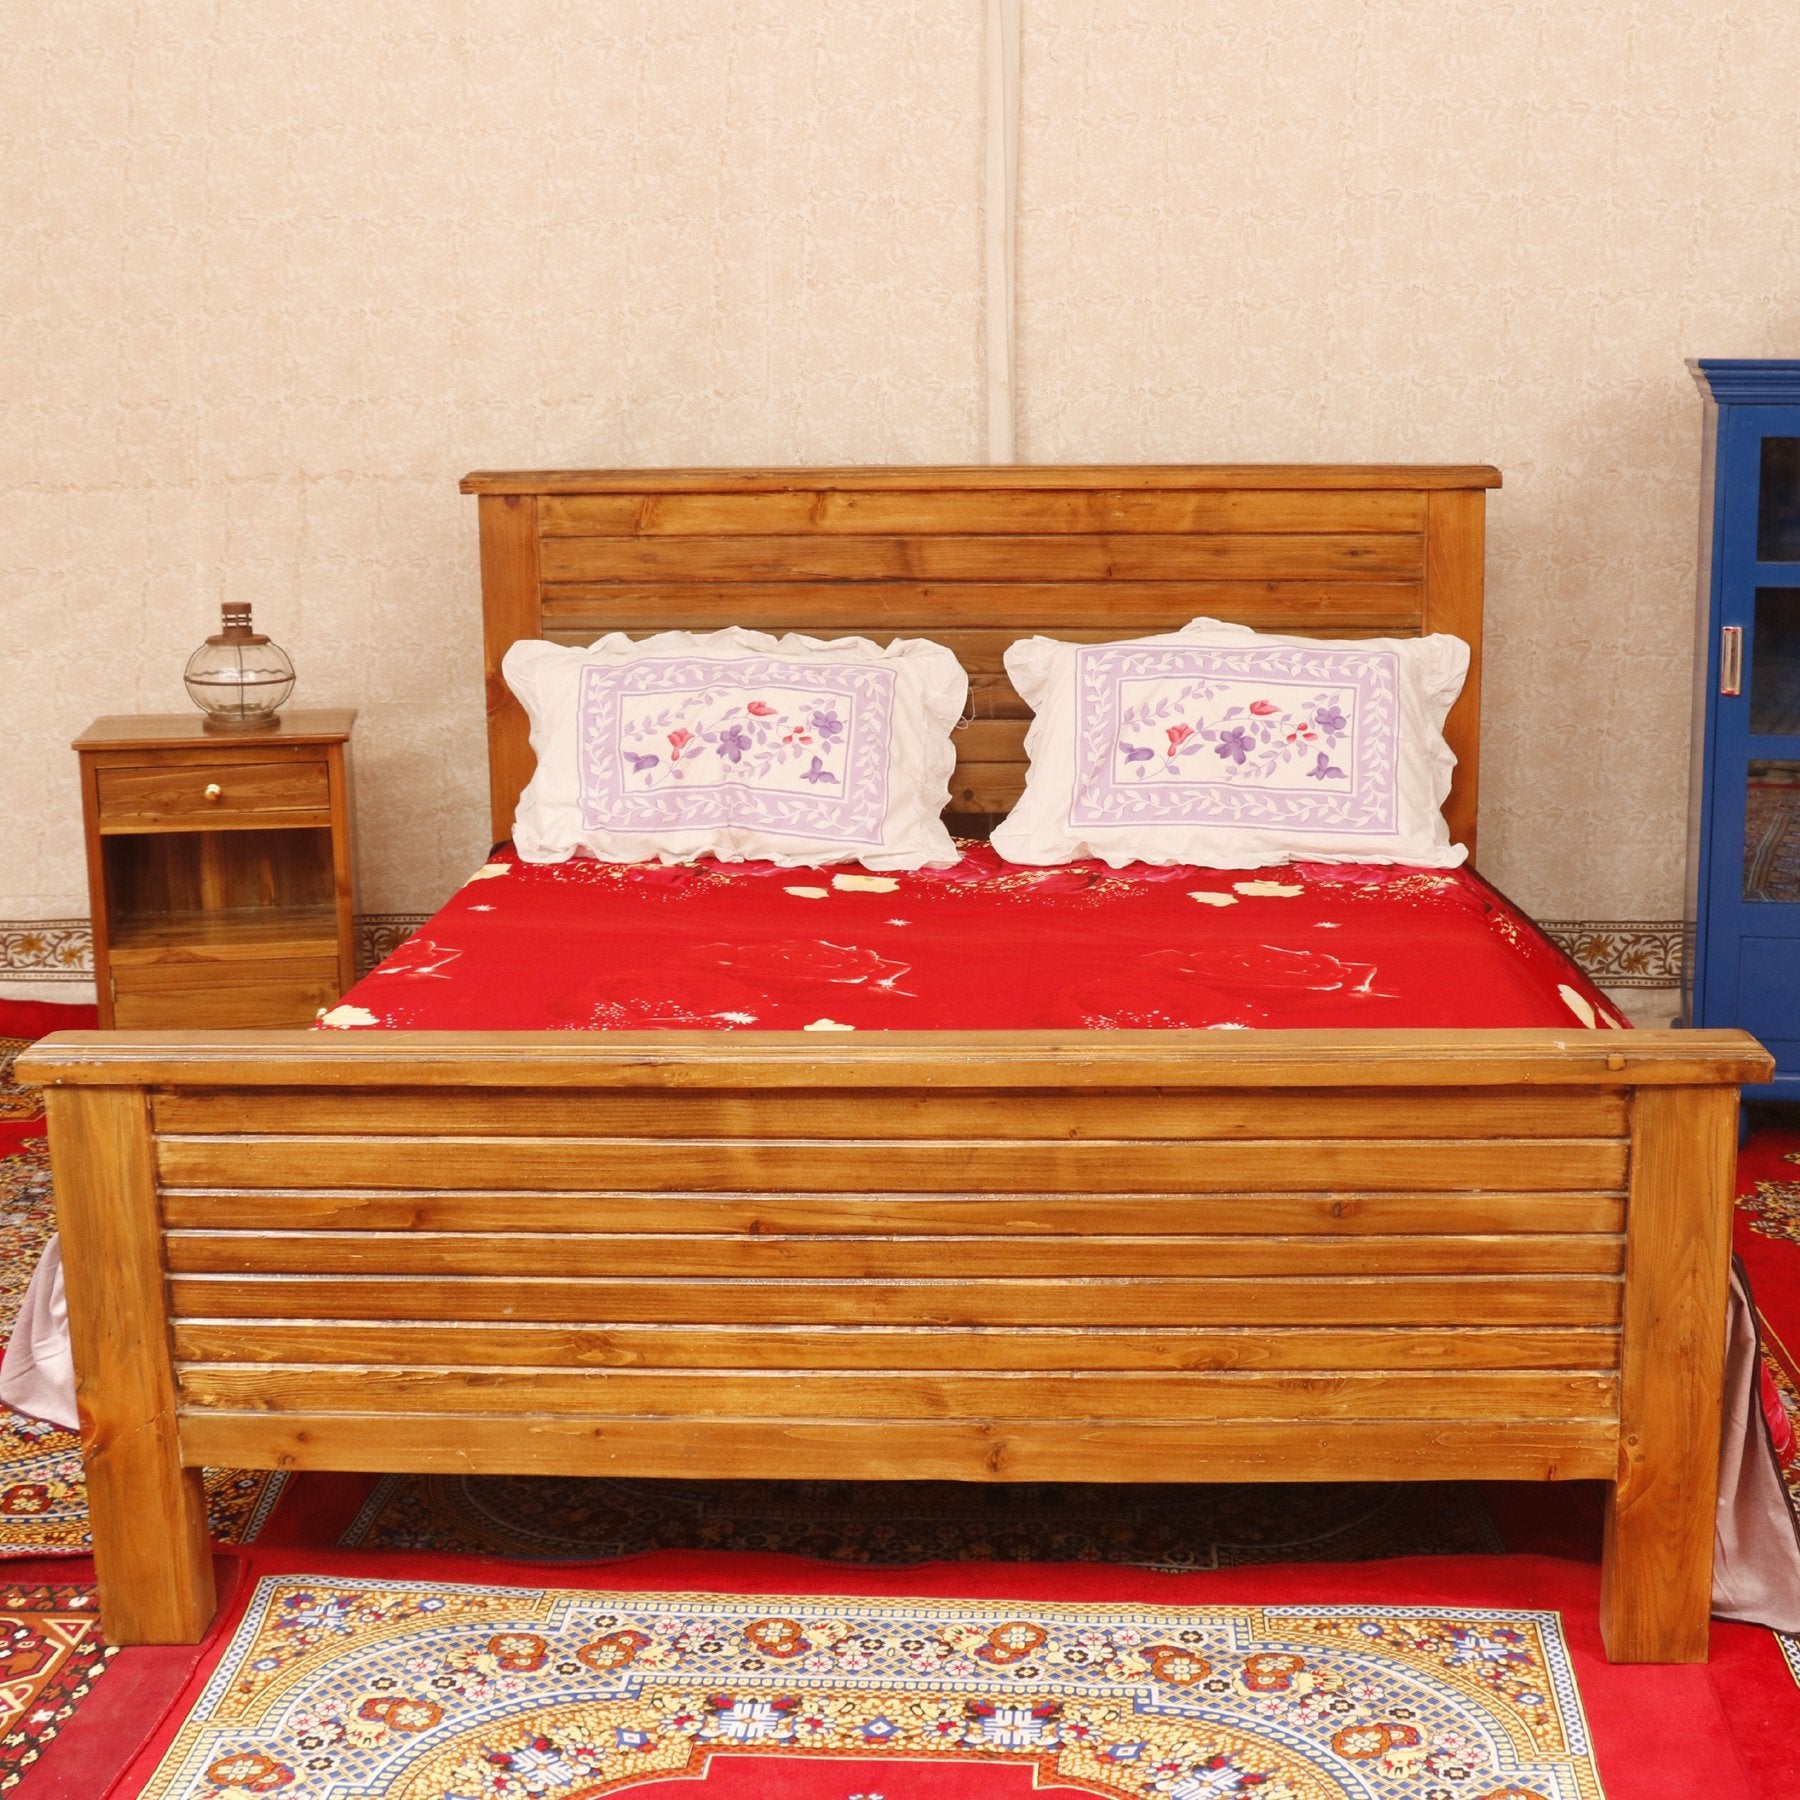 Things to Keep in Mind While Designing a Middle-class Indian Bedroom